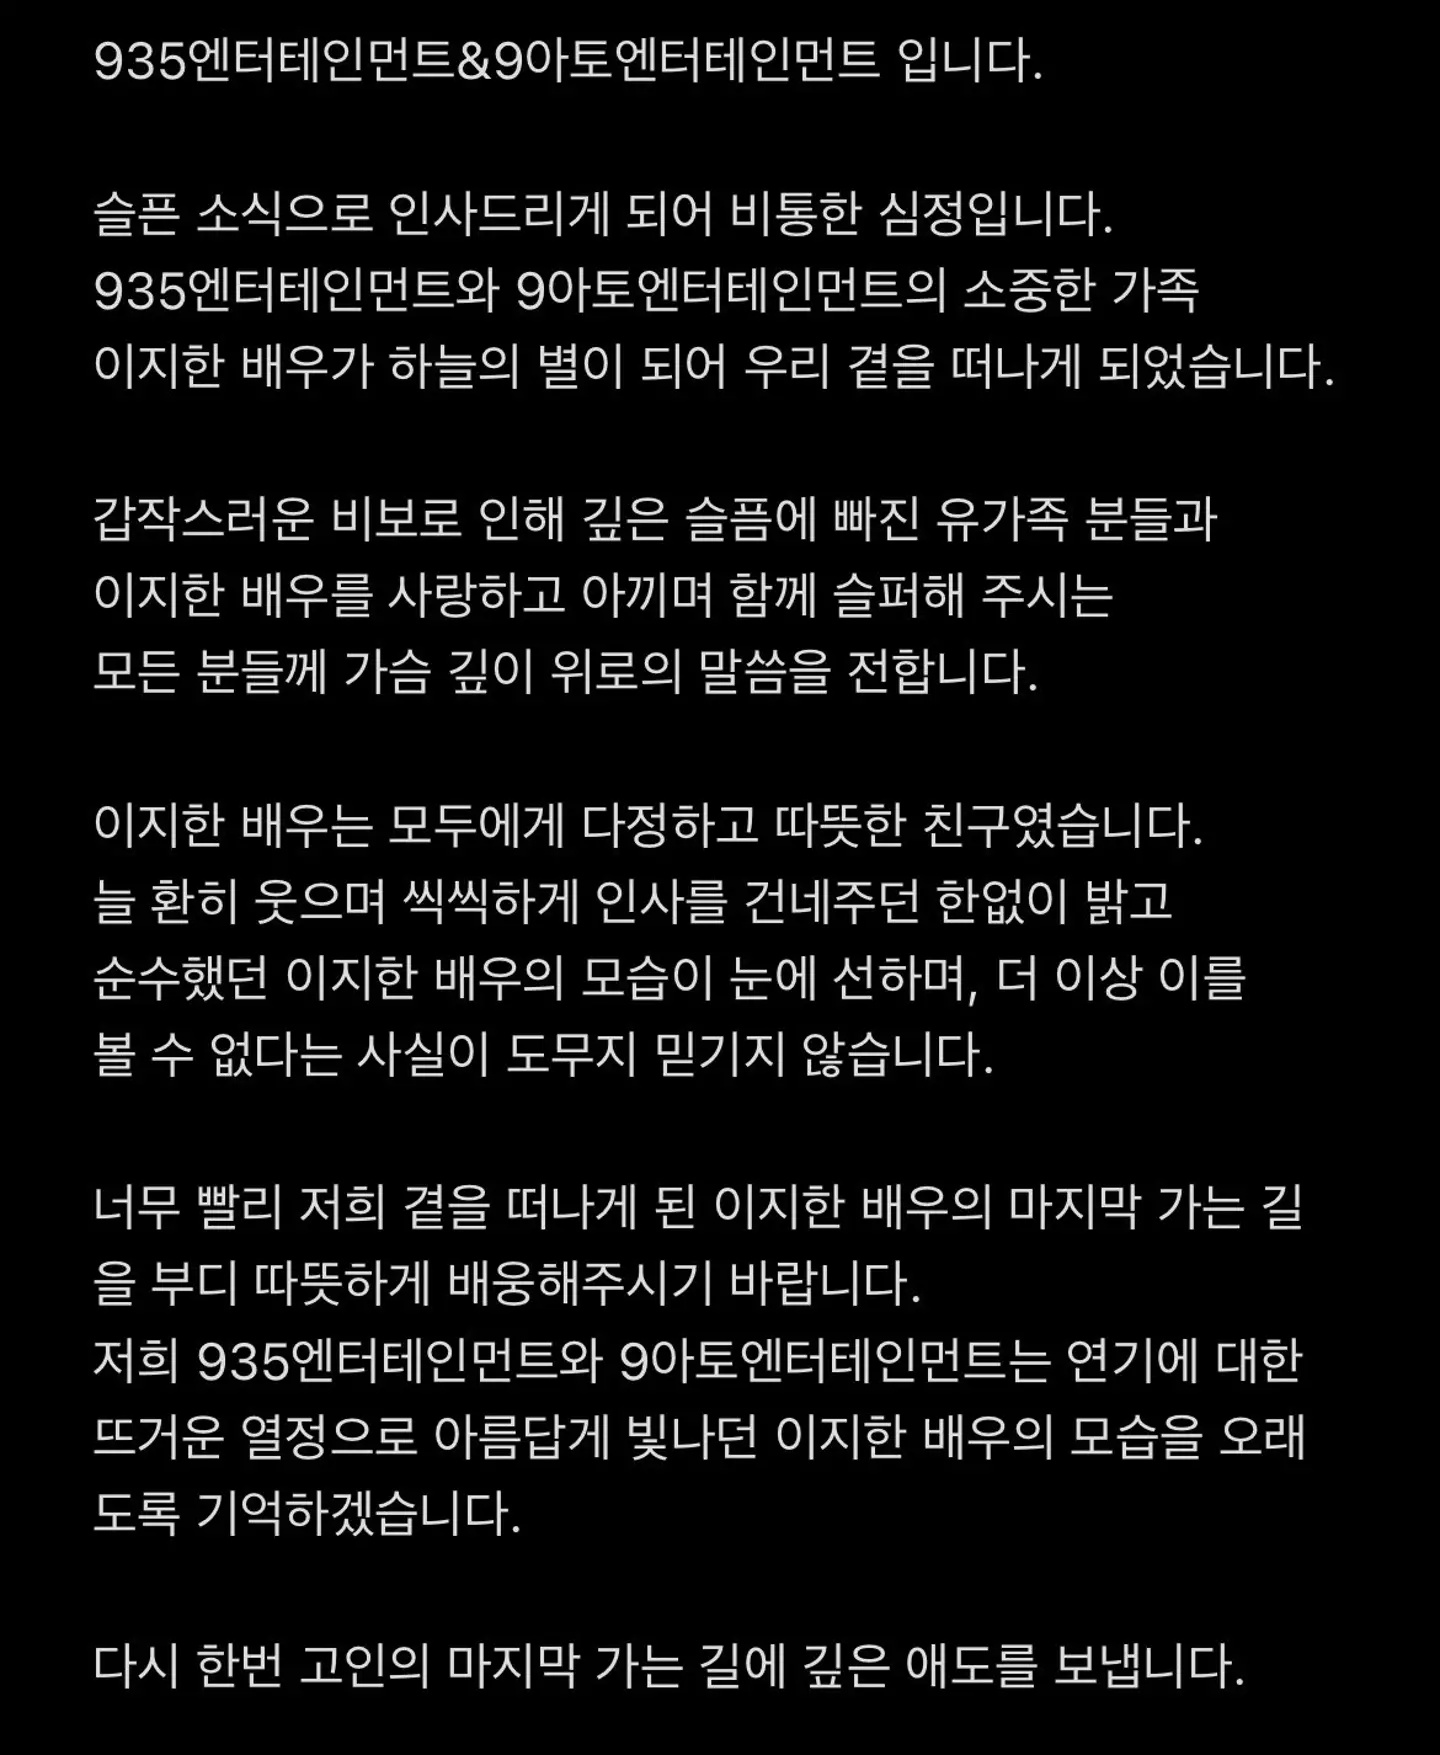 935Entertainment posted a statement on Twitter addressing Lee Jihan's passing.